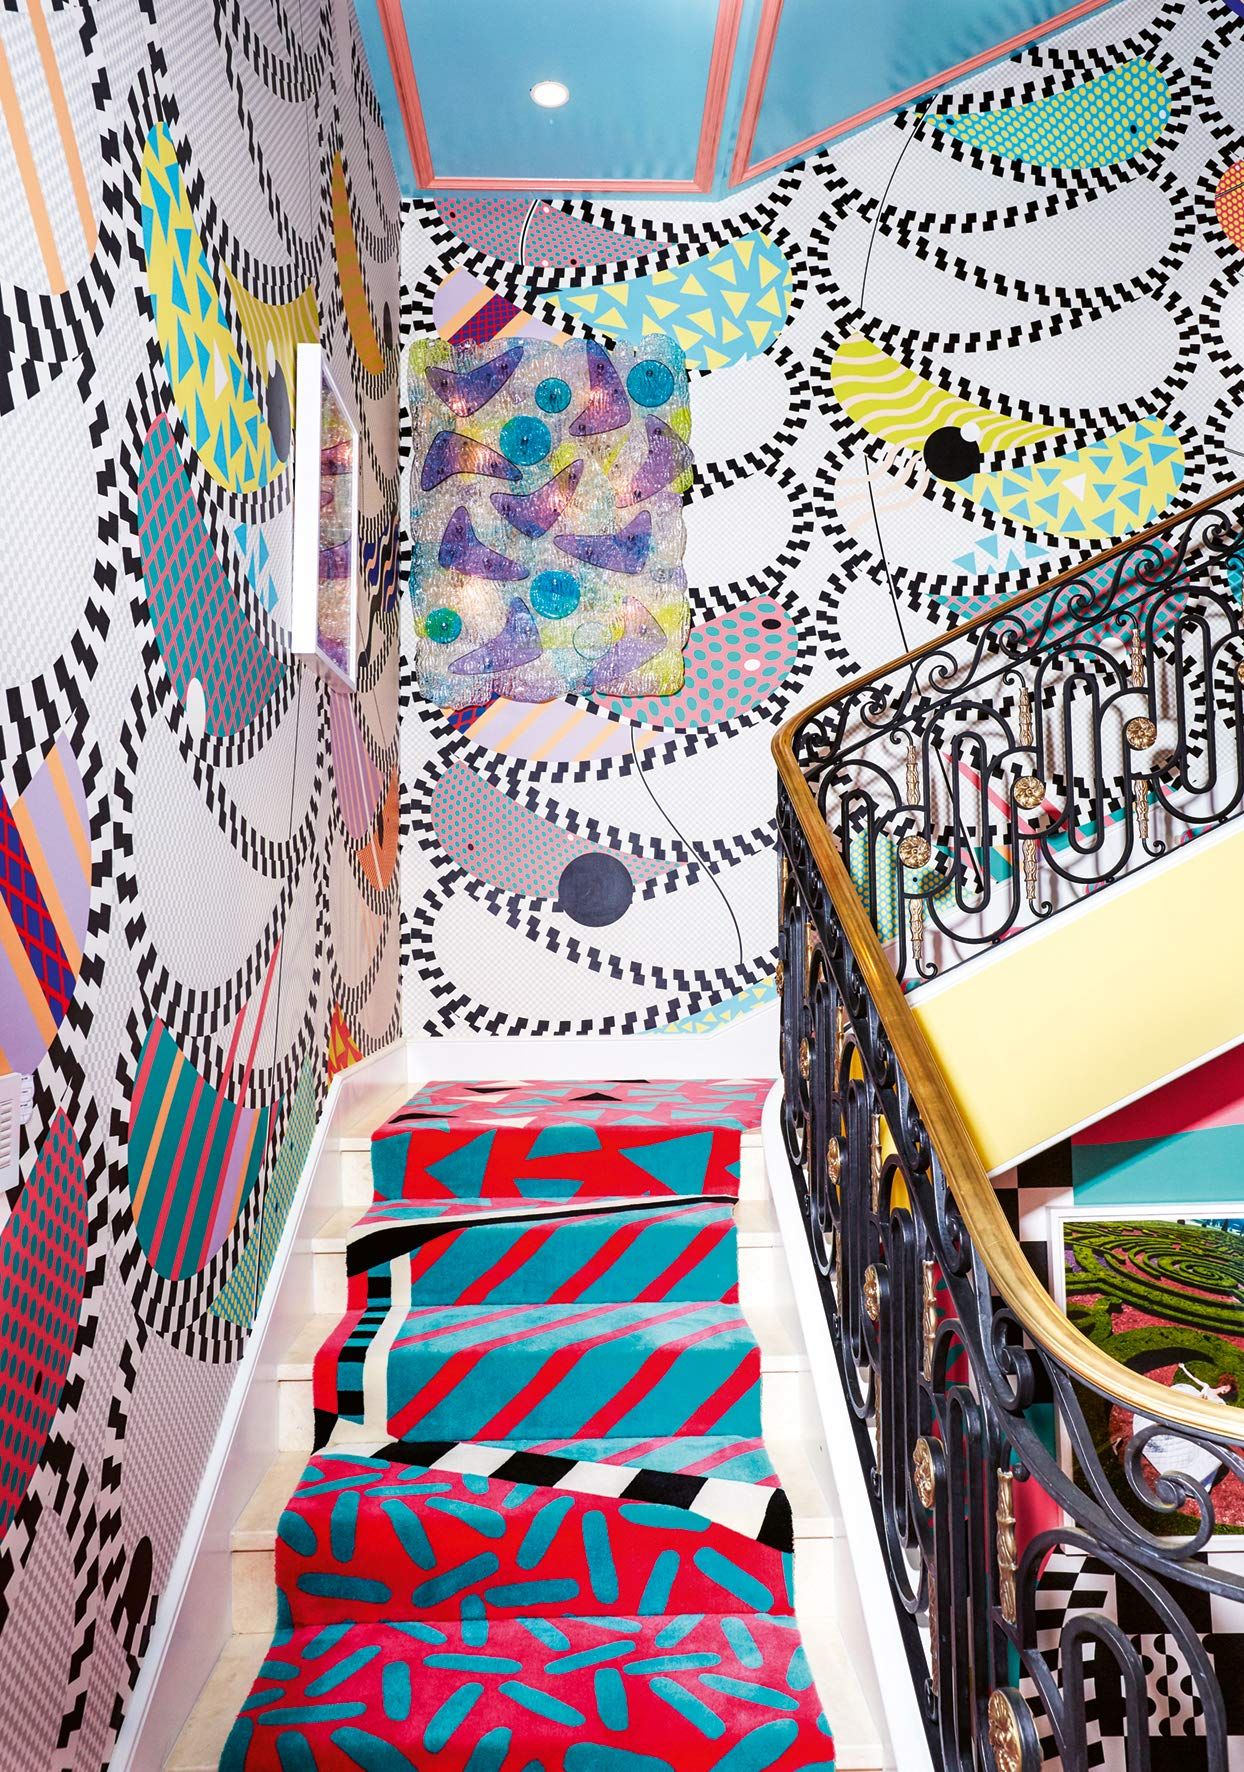  MORE IS MORE : MEMPHIS, MAXIMALISM, AND NEW WAVE DESIGN 